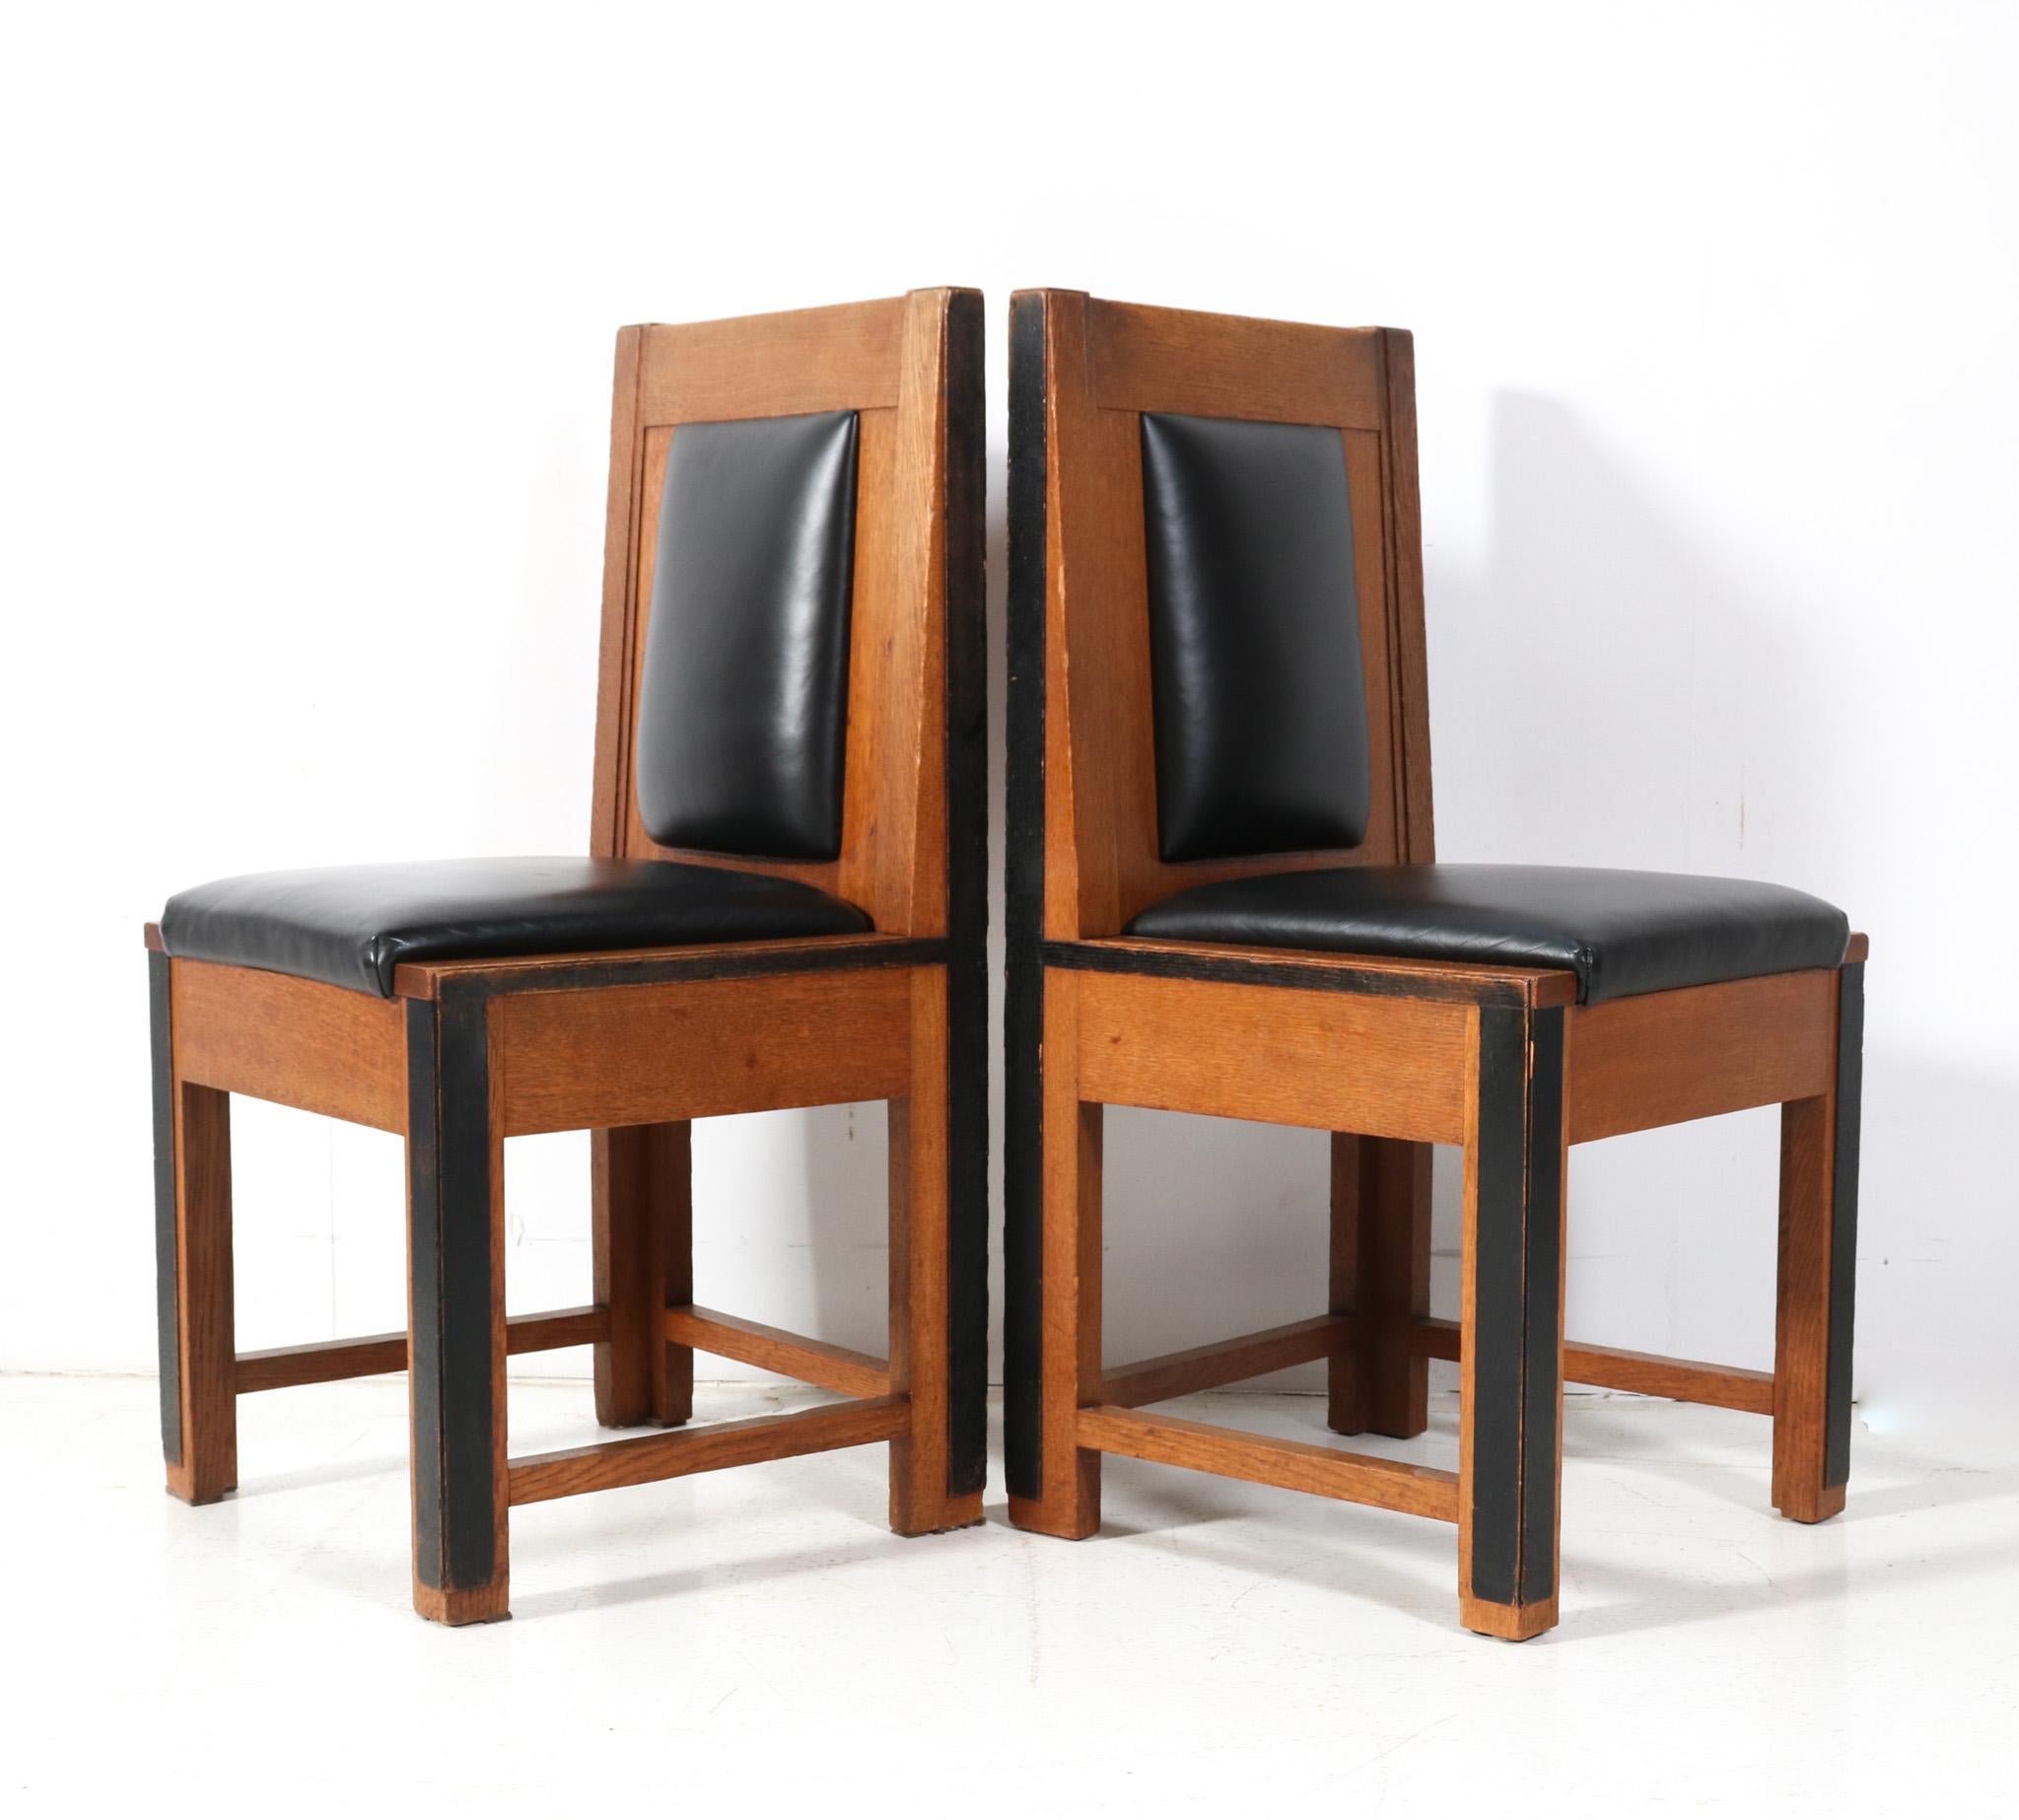 Lacquered Eight Oak Art Deco Modernist Chairs by Fa. Randoe Haarlem, 1920s For Sale